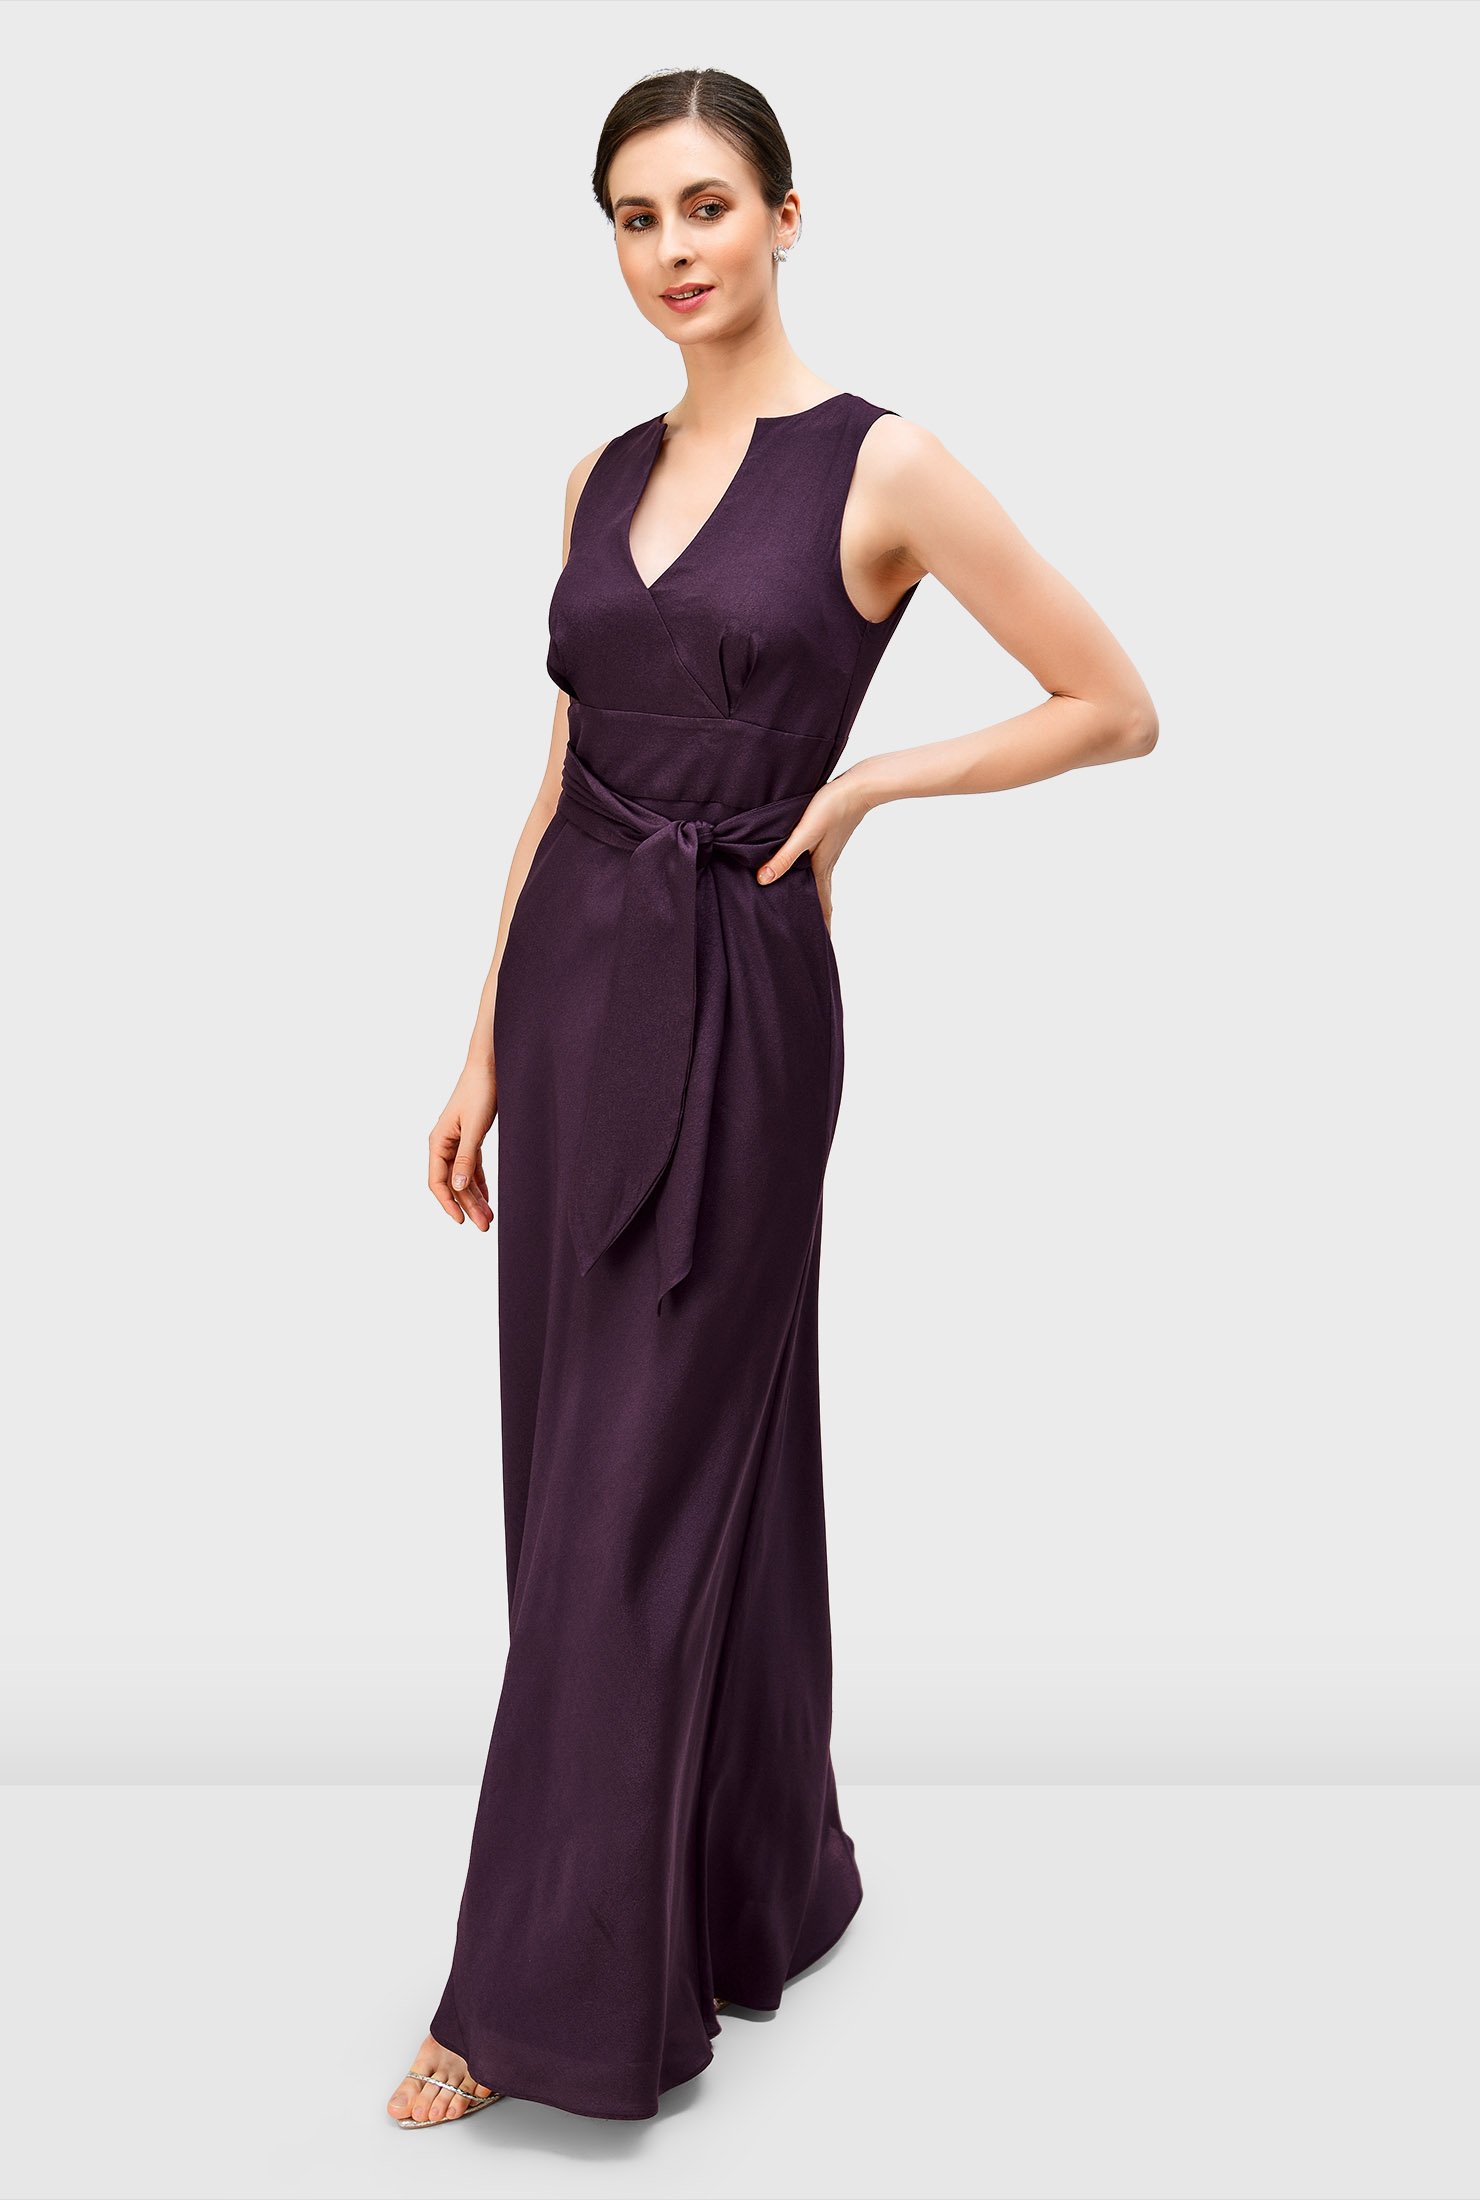 Earn the title of best-dressed wedding guest in our elegant crepe dress styled with a surplice bodice, empire waist and floor-length full flare skirt.